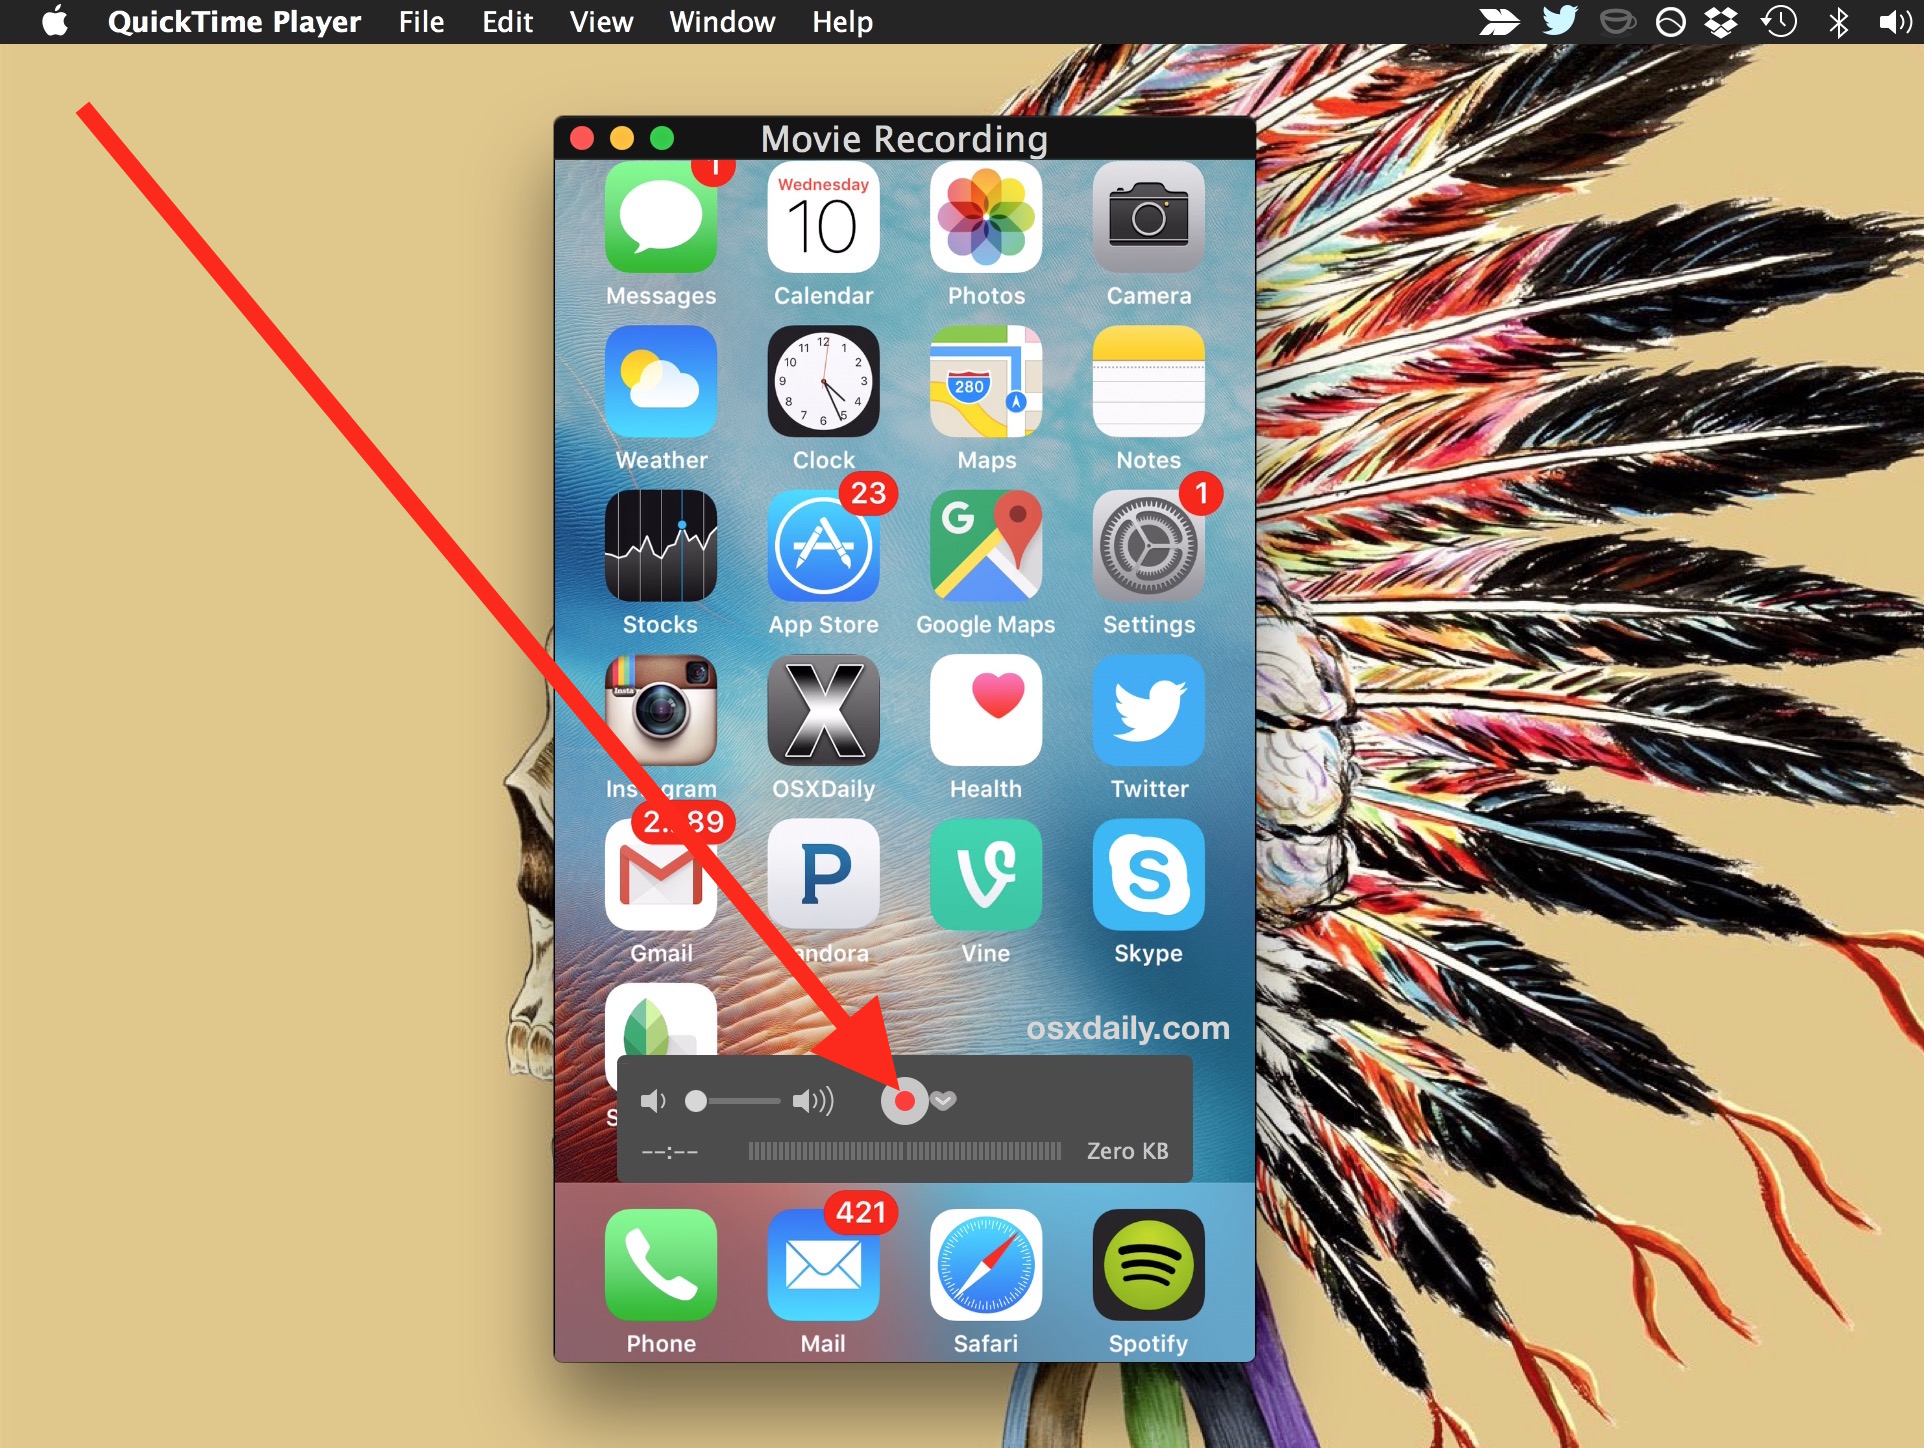 Part 2: How to Airplay iPhone to Mac using Third-party Screen-Mirroring App